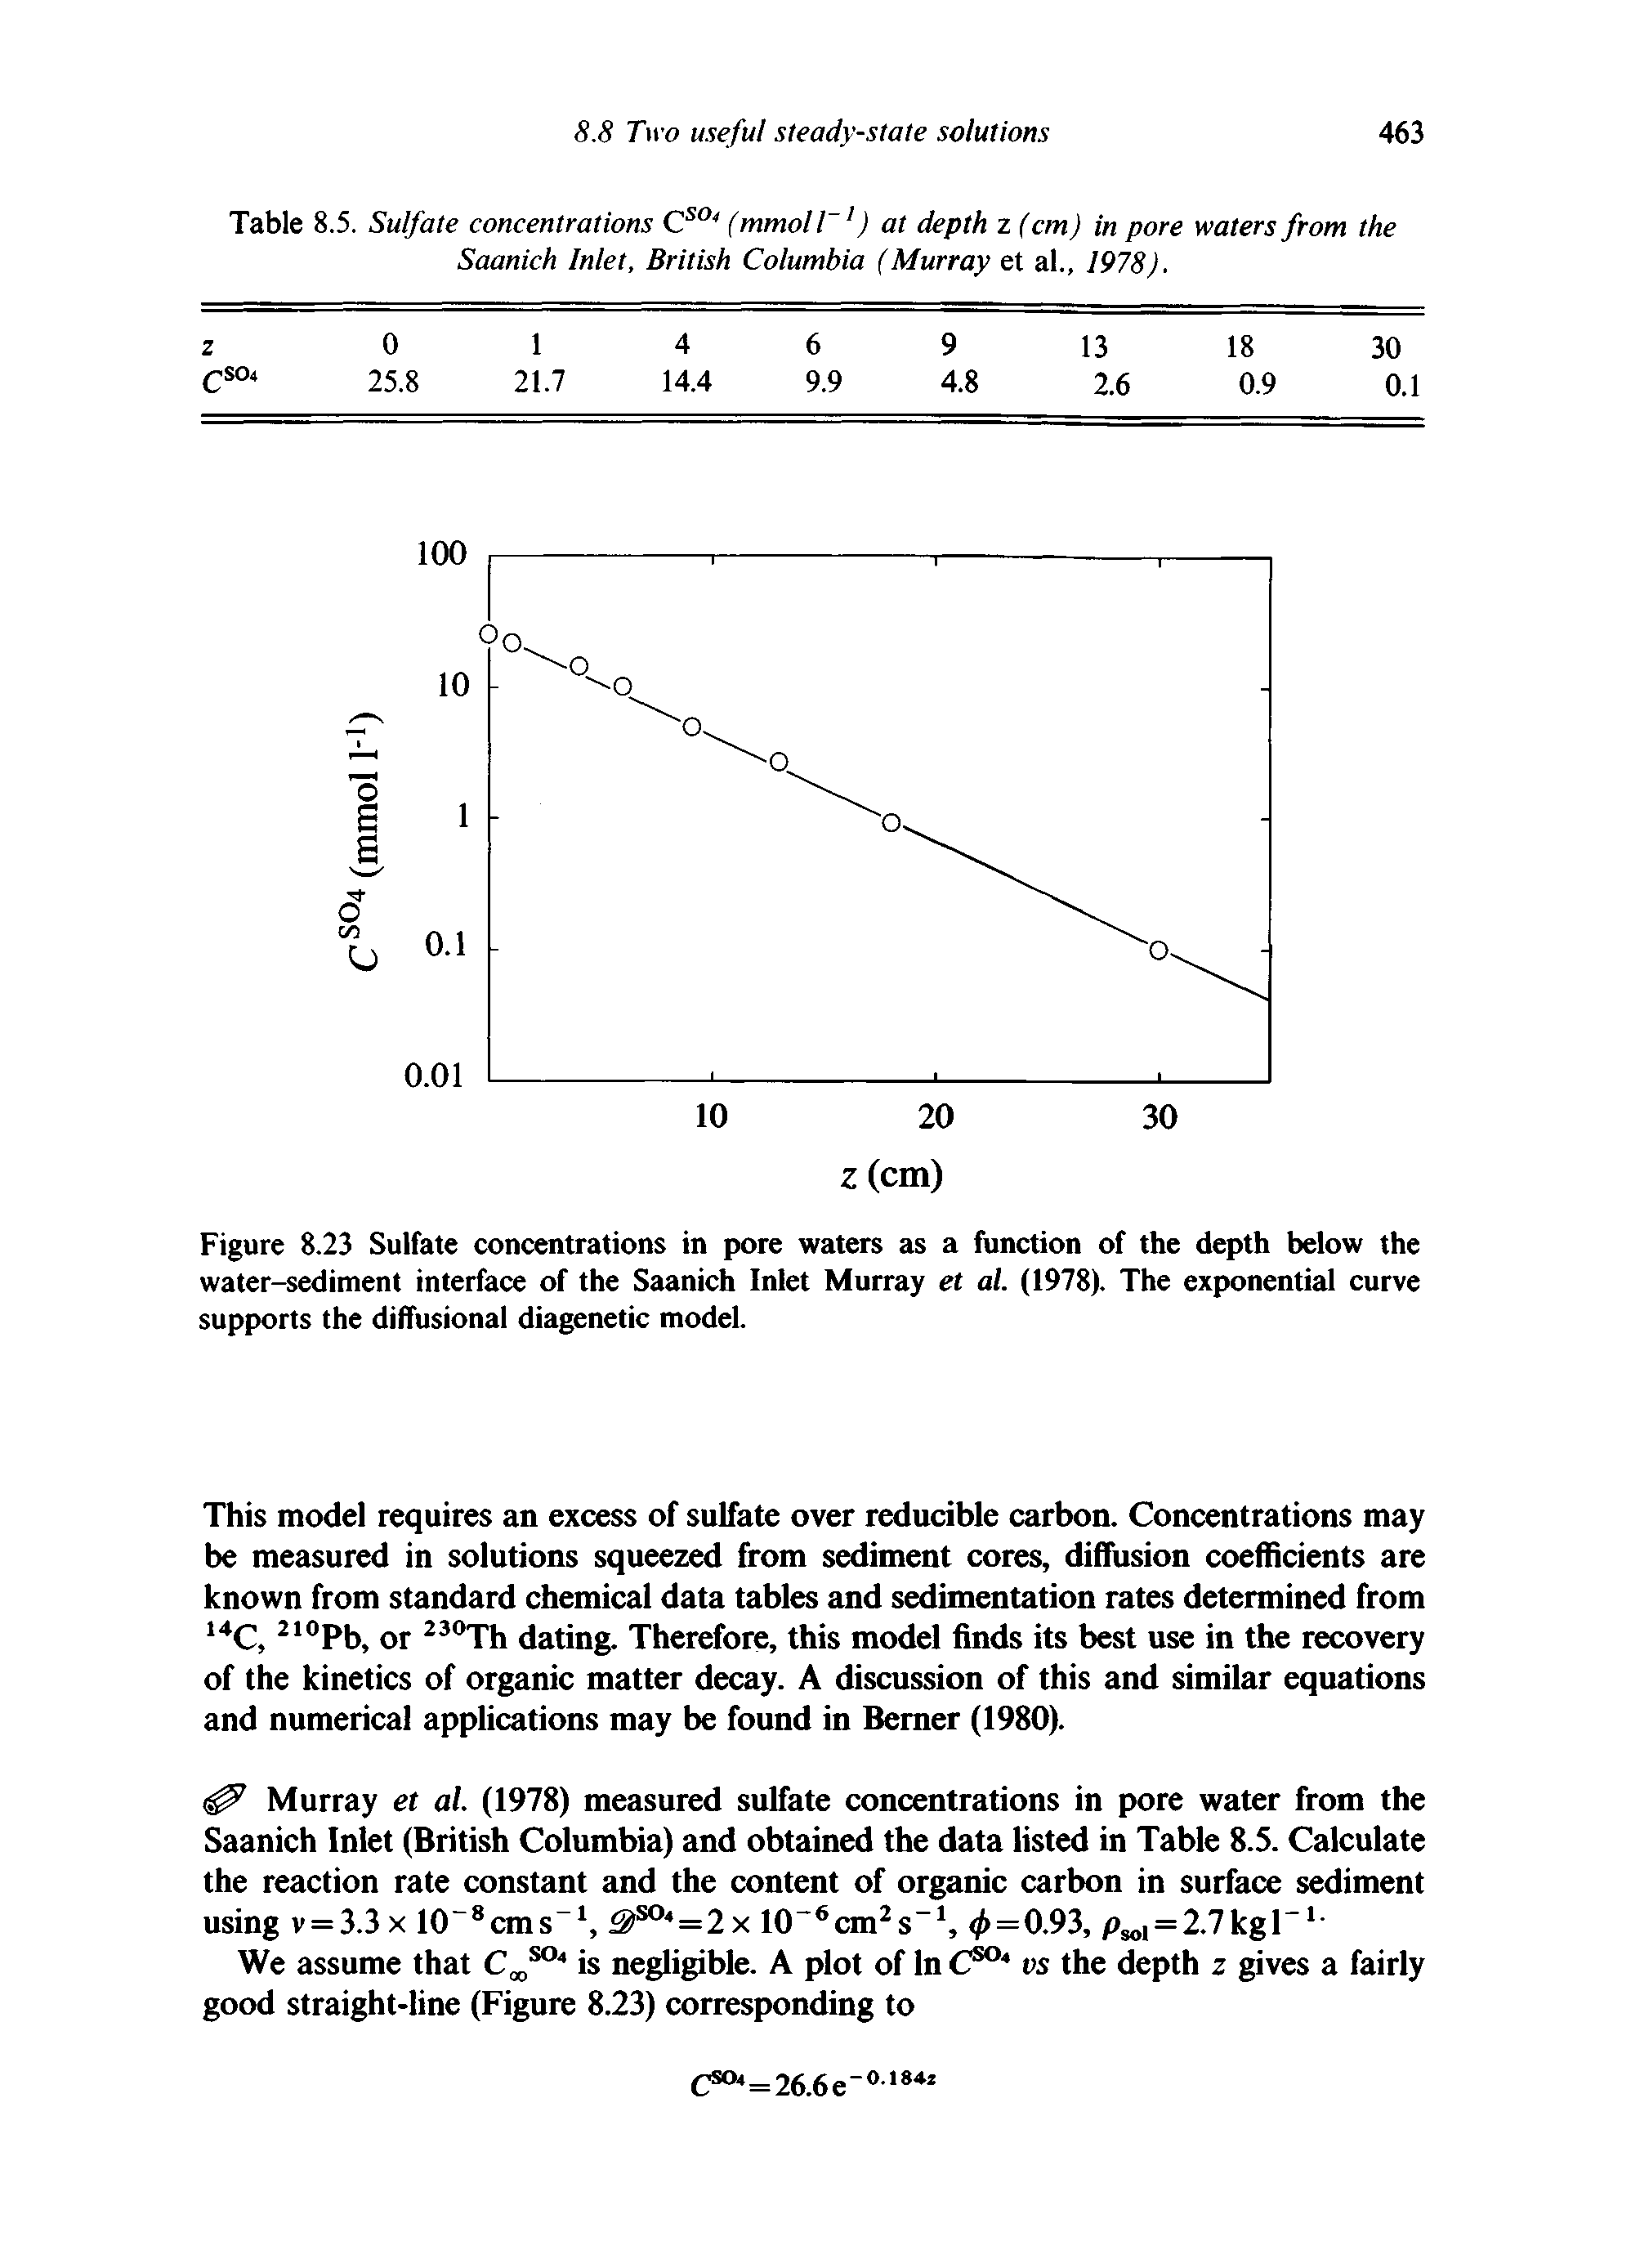 Table 8.5. Sulfate concentrations Cs°4 (mmol l 1) at depth z (cm) in pore waters from the Saanich Inlet, British Columbia (Murray et al., 1978).